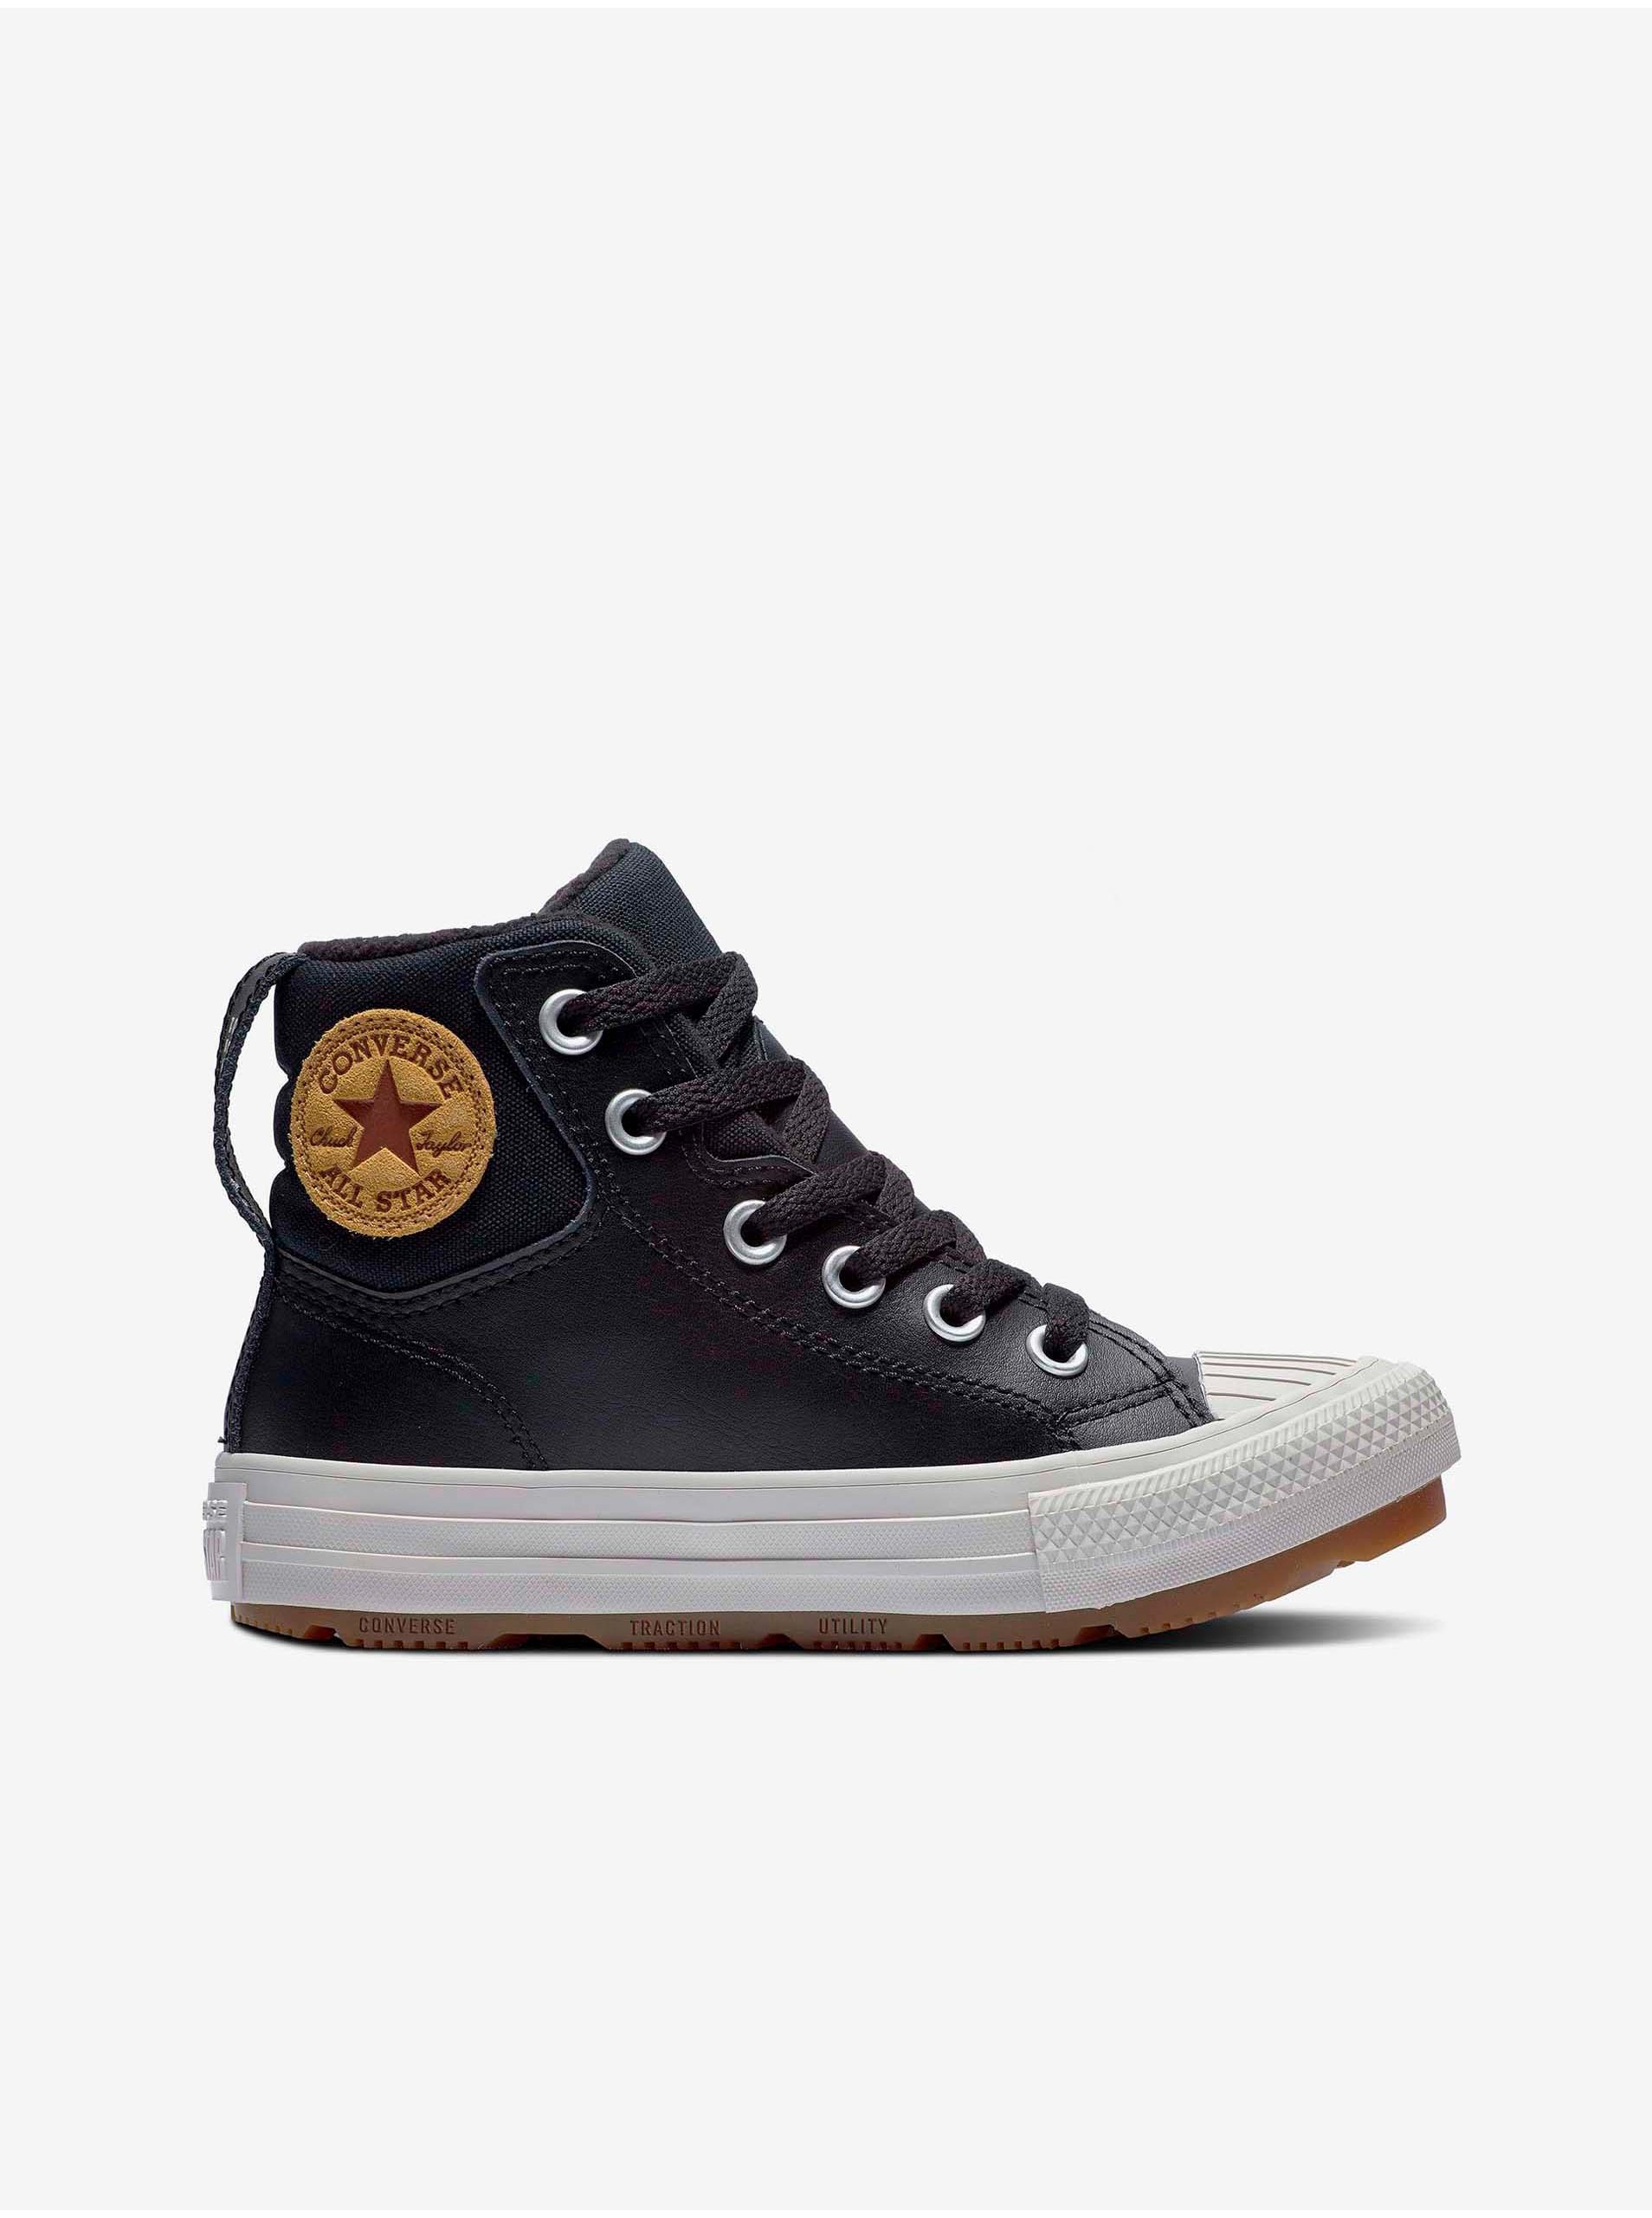 Black Boy Ankle Leather Sneakers Converse Chuck Taylor All Star - Unisex